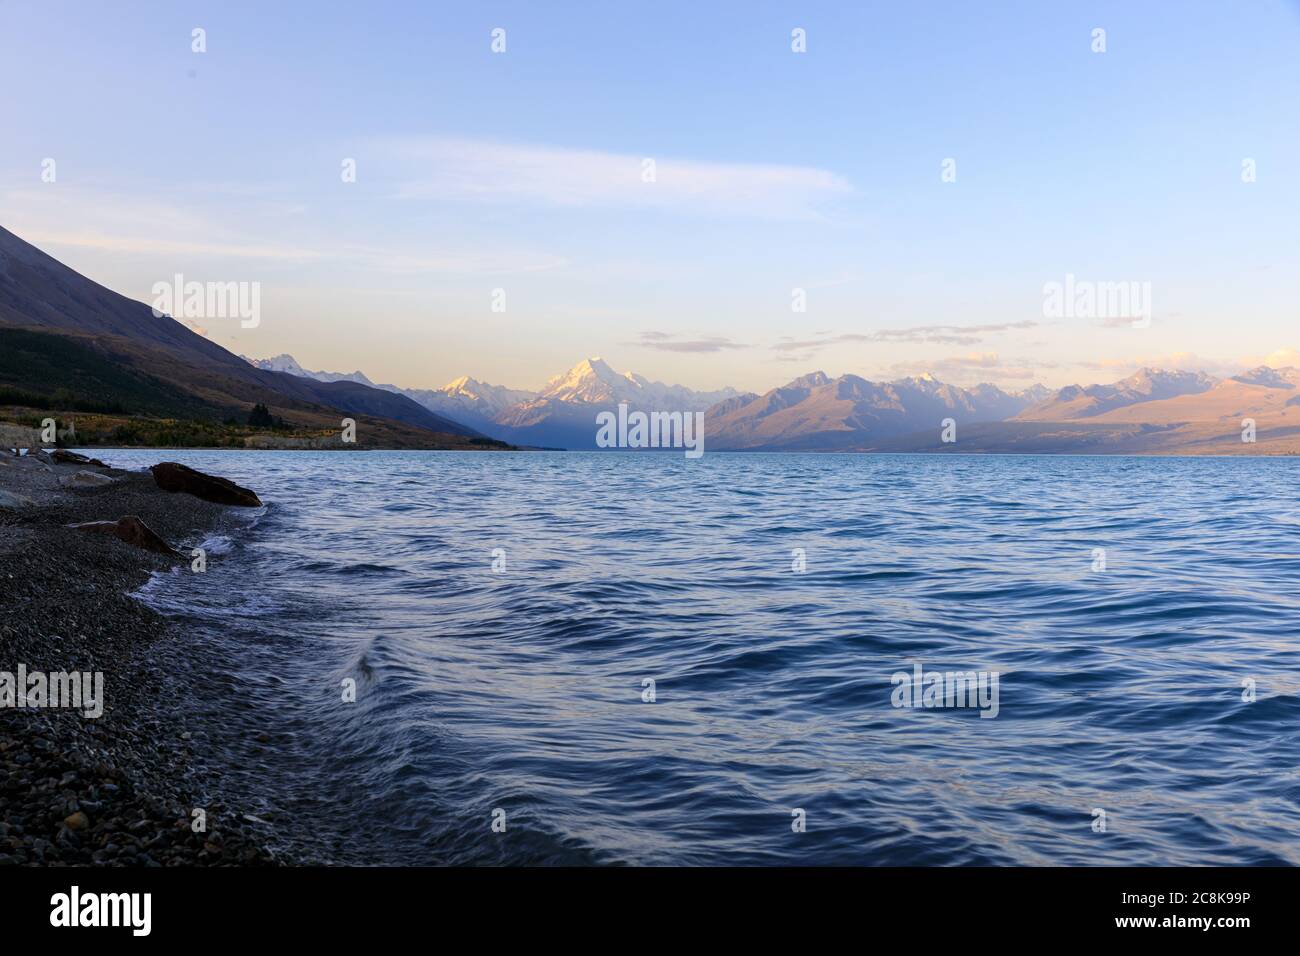 Lake Pukaki with Mt Cook and the Southern Alps in the background at sunset. Stock Photo